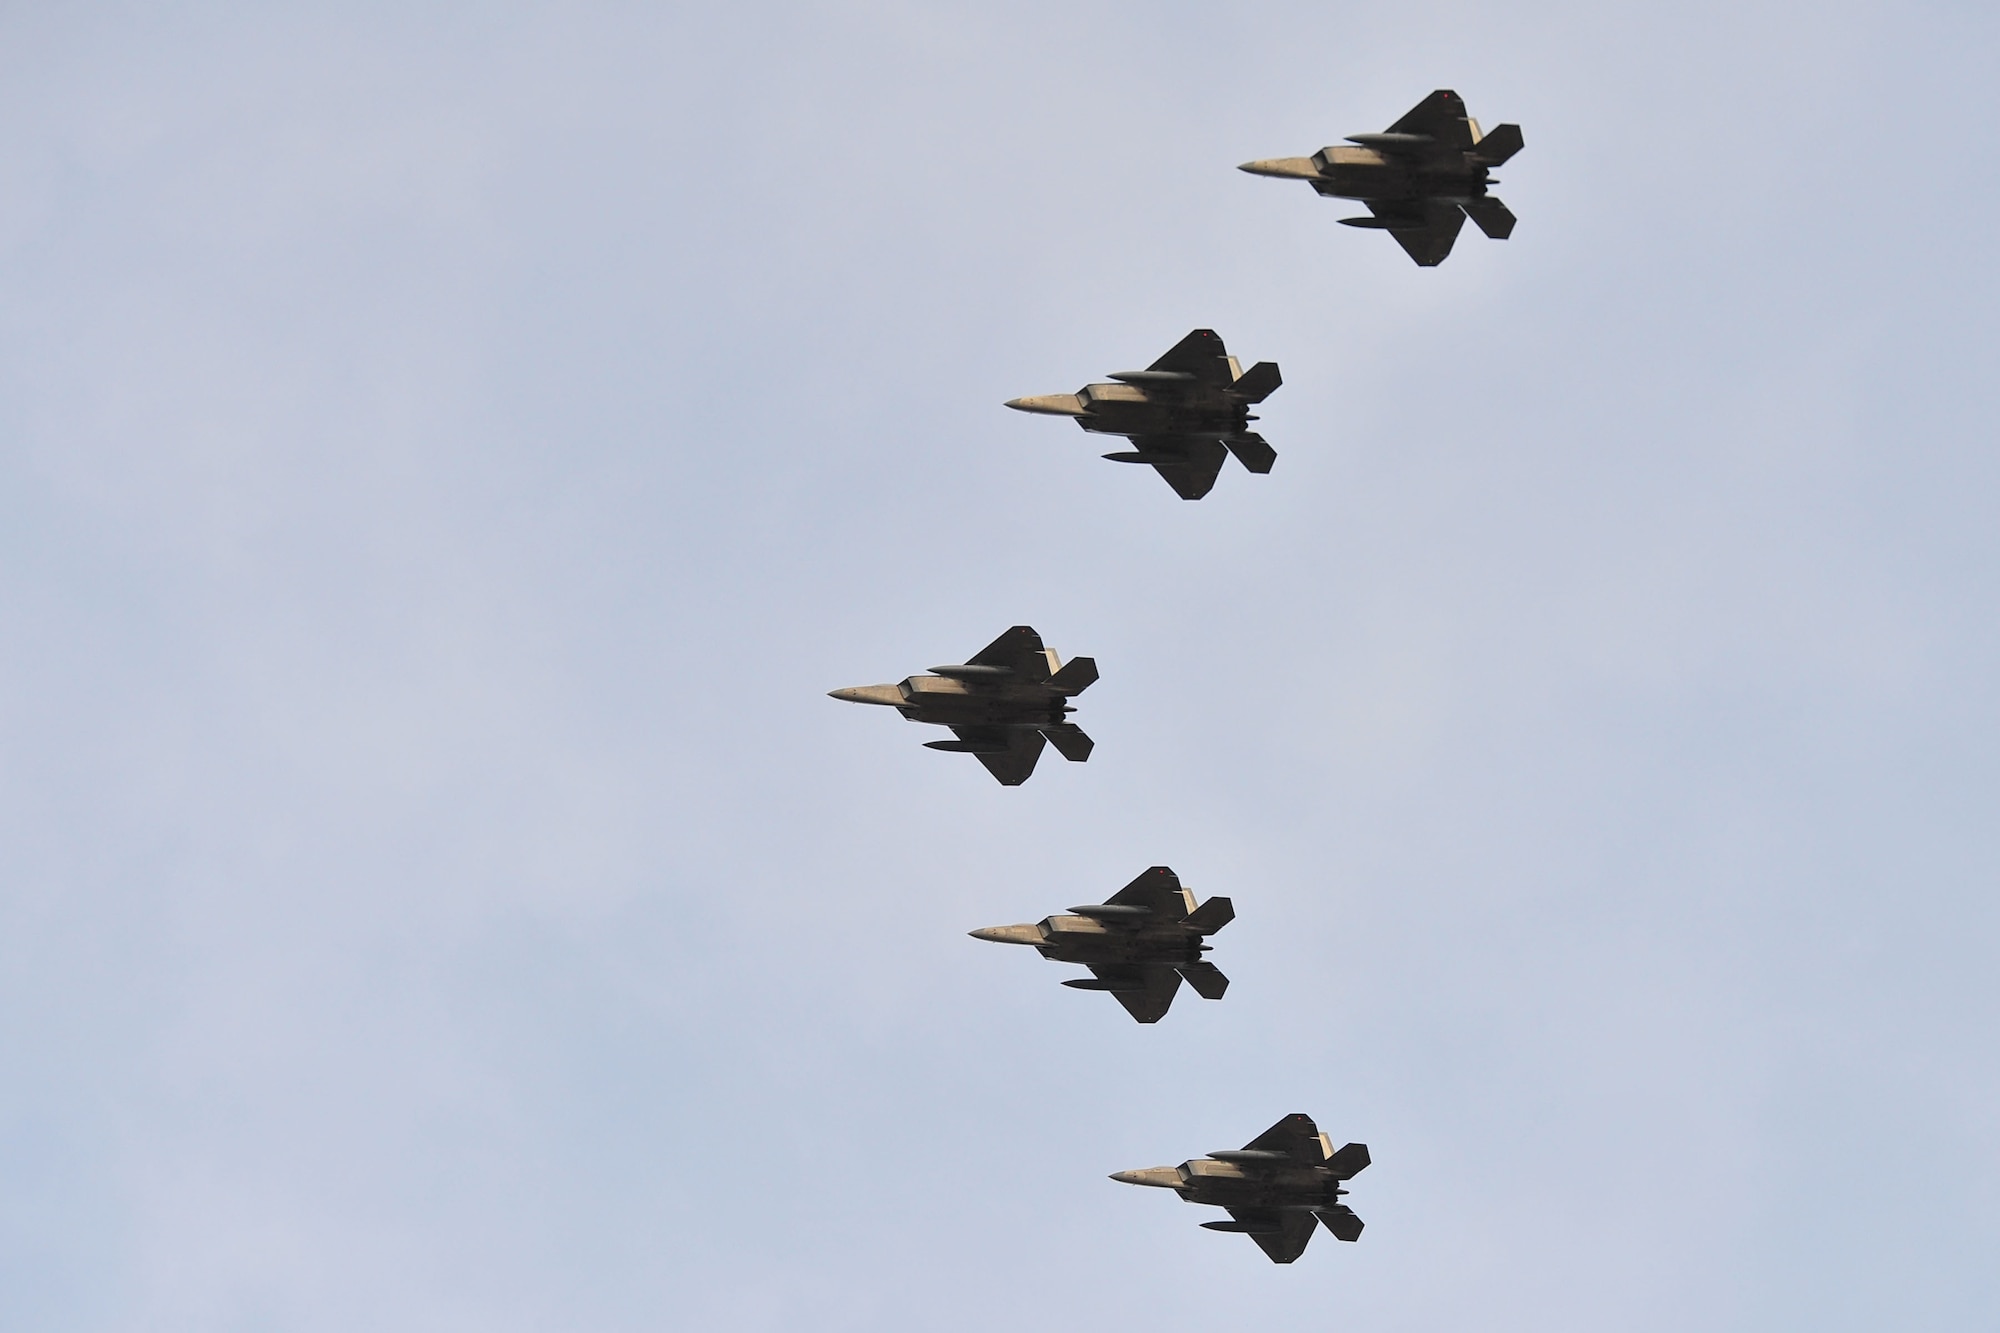 Five F-22 Raptors fly in formation Jan 7, 2014, over Tyndall Air Force Base during an event held in their honor. These jets mark the beginning of a new mission at Tyndall and are the first five of 24 marked to call Tyndall their new home. (U.S. Air Force photo/Airman 1st Class Dustin Mullen)